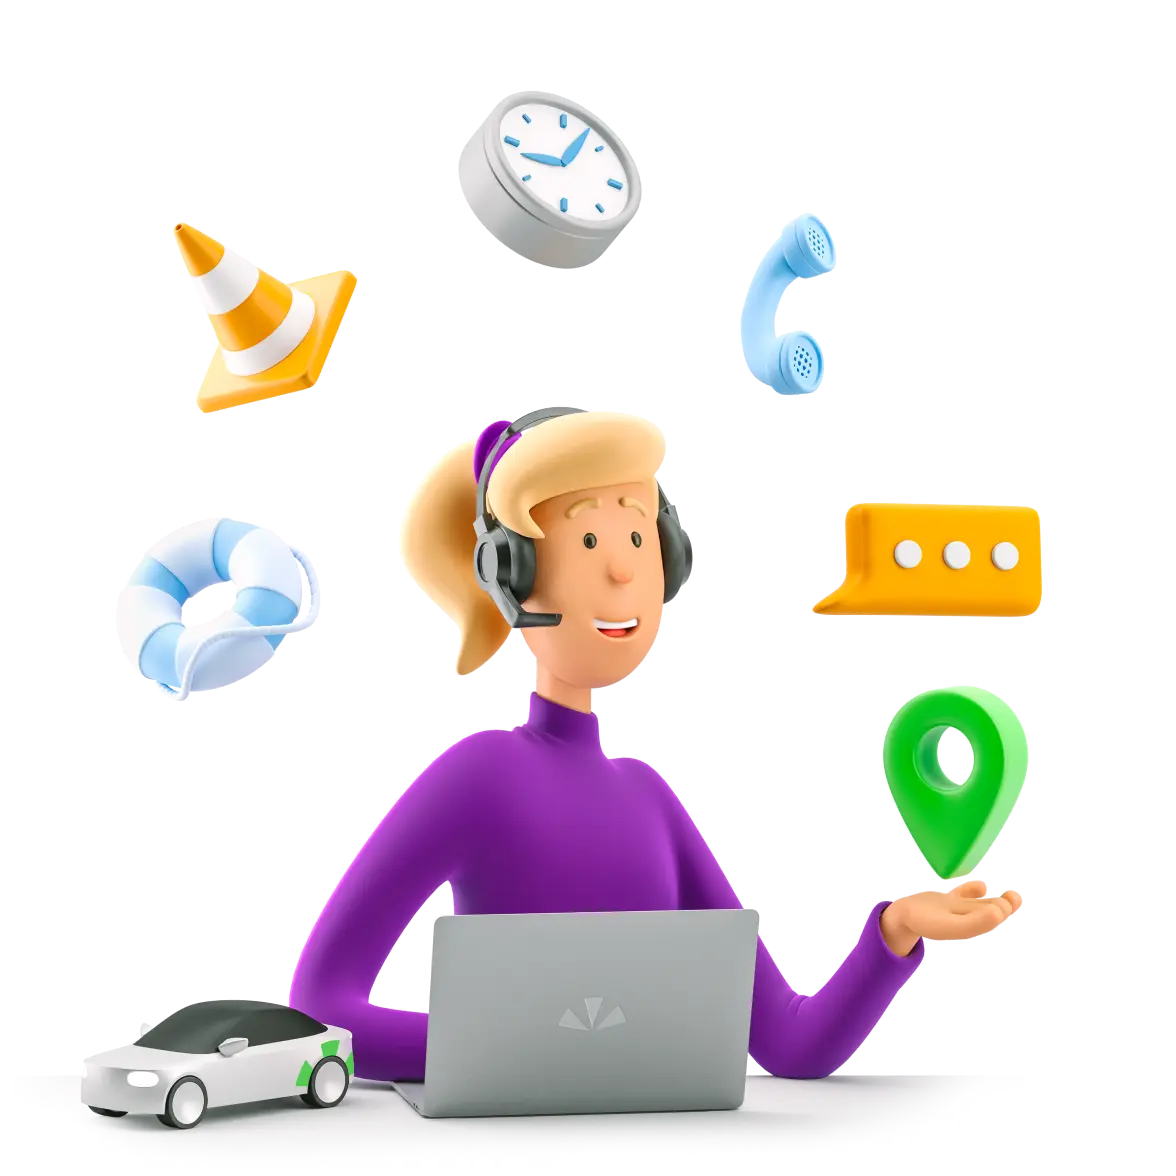 Icon representing car rental assistance, featuring an image of a person holding a smartphone or a customer service representative holding a headset. The image represents the availability of help and support for customers who need assistance with their rental, whether it be with booking, payment, or other inquiries. This icon signifies the service provider's dedication to customer service and their commitment to ensuring a positive and satisfactory rental experience.